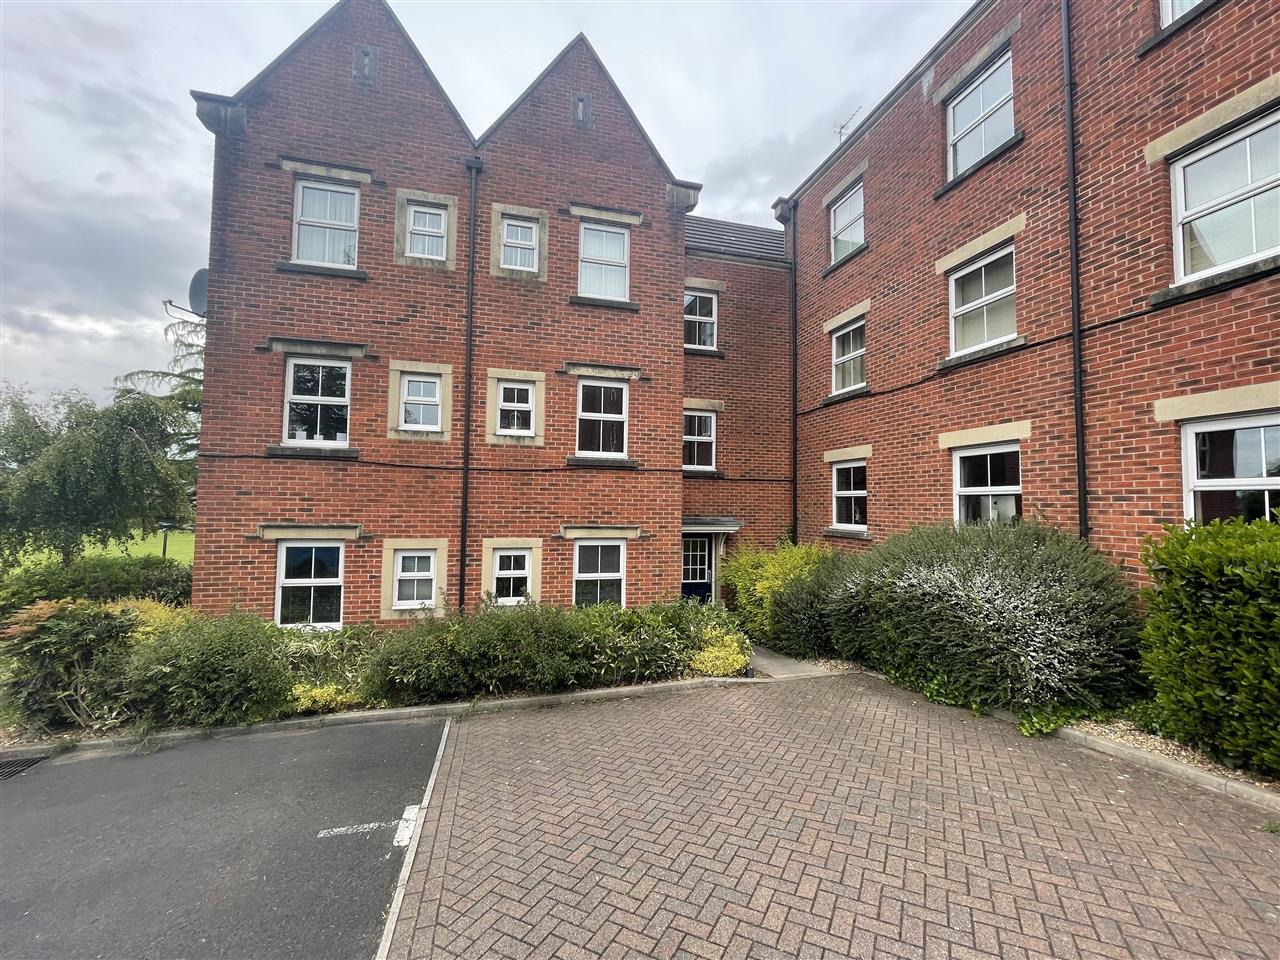 2 bed apartment for sale in Alma Wood Close, Chorley - Property Image 1